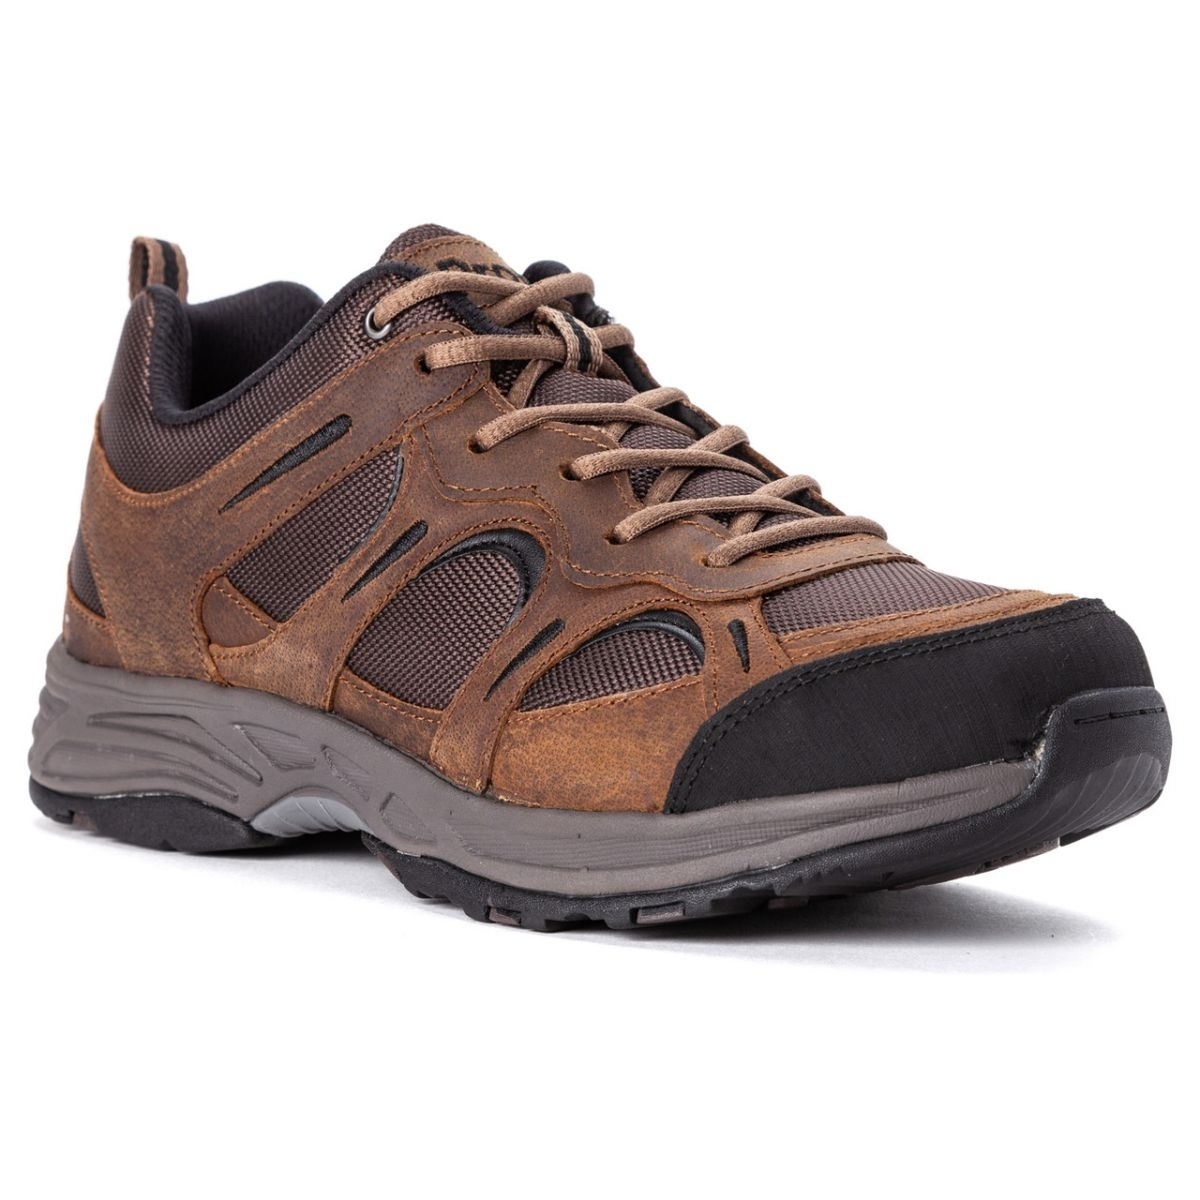 Propet Men's Connelly Hiking Shoe Brown - M5503BR BROWN - BROWN, 14-D